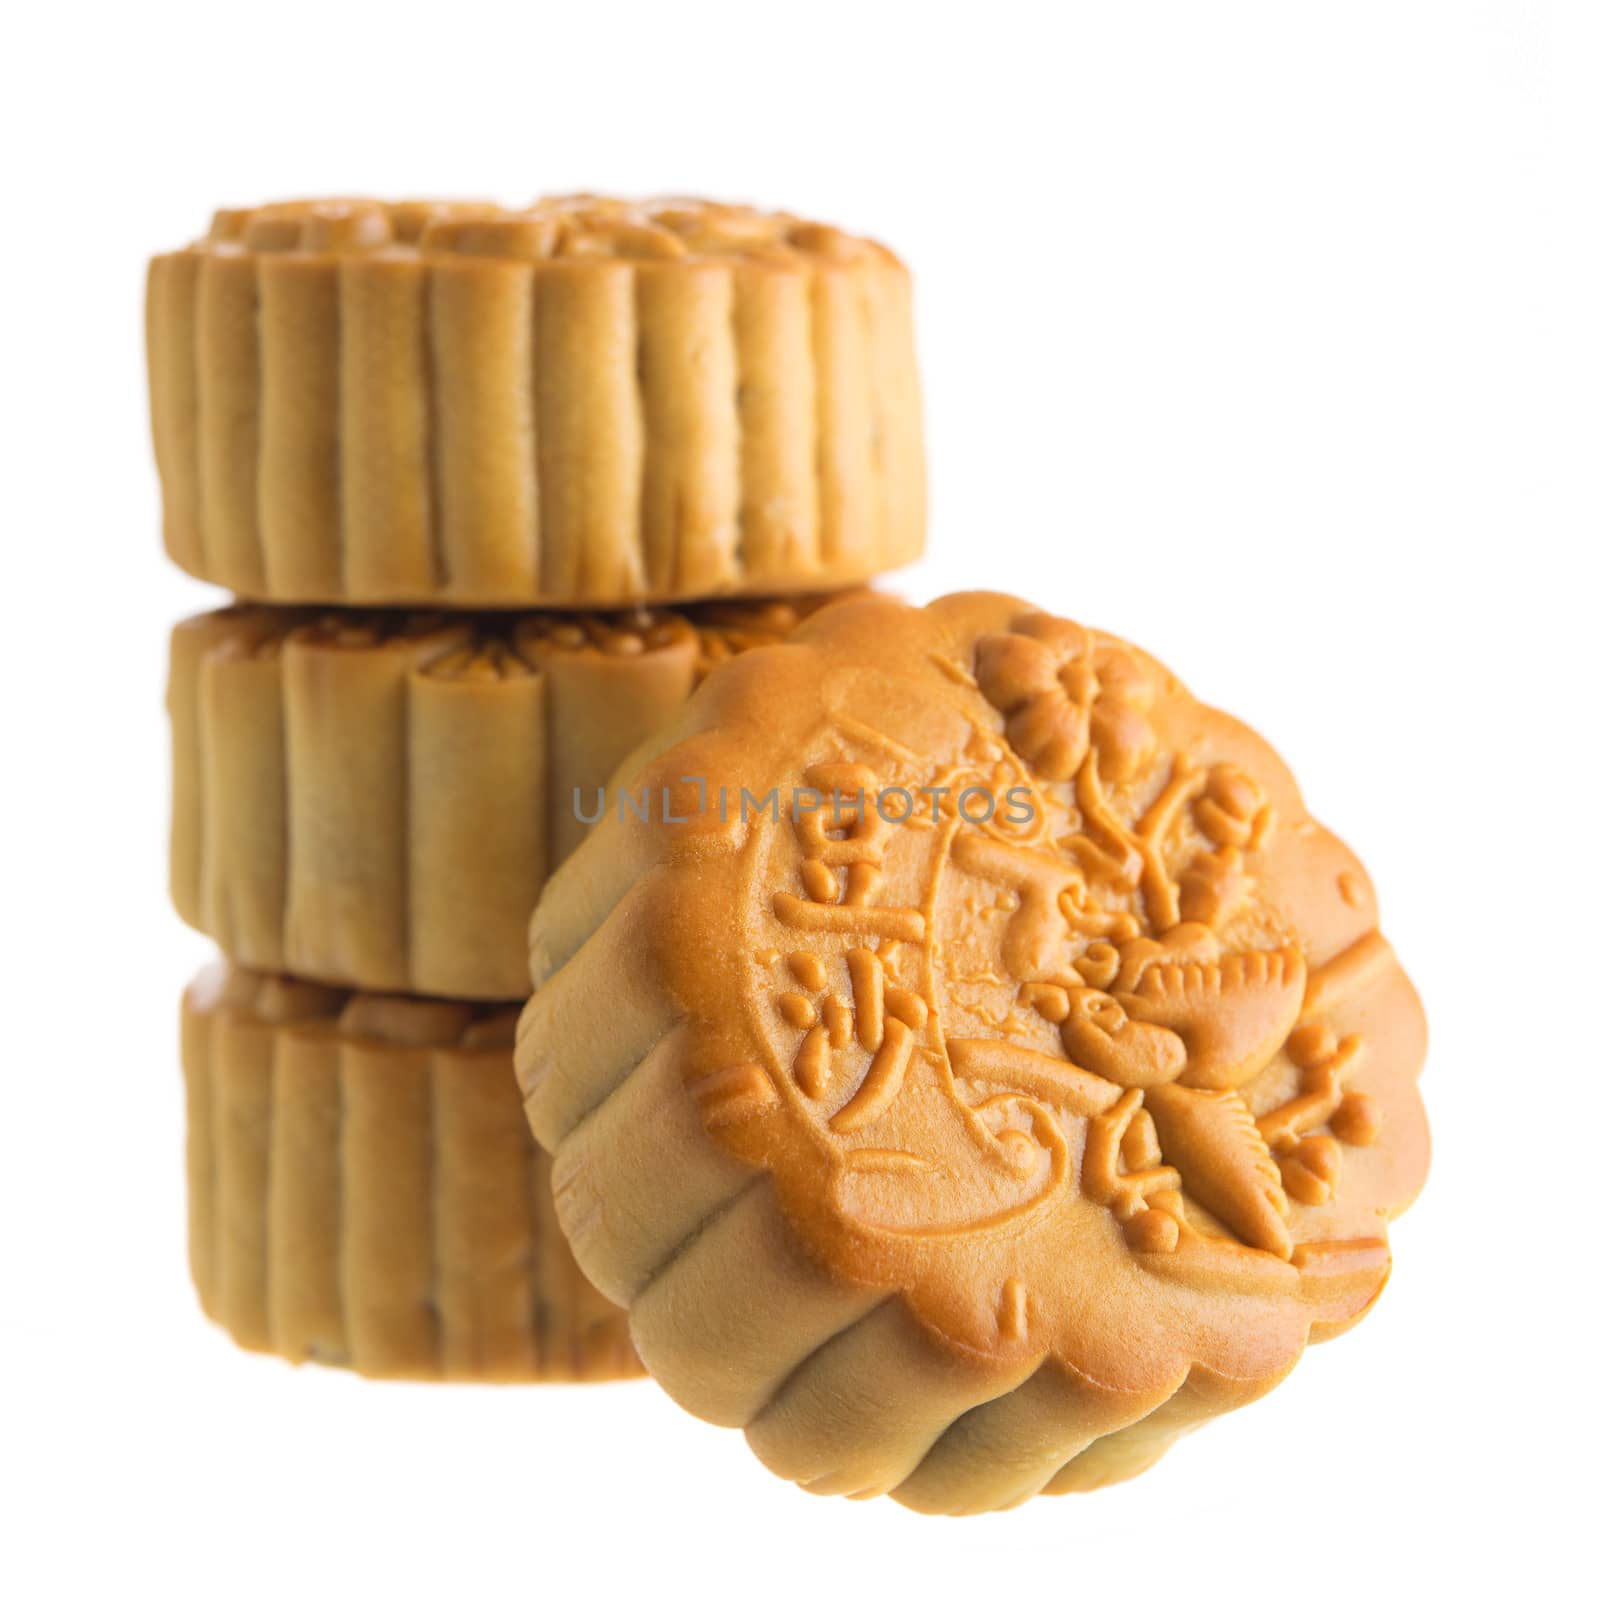 Traditional mooncakes isolated on white background. Chinese mid autumn festival foods. The Chinese words on the mooncakes means red bean paste, not a logo or trademark.